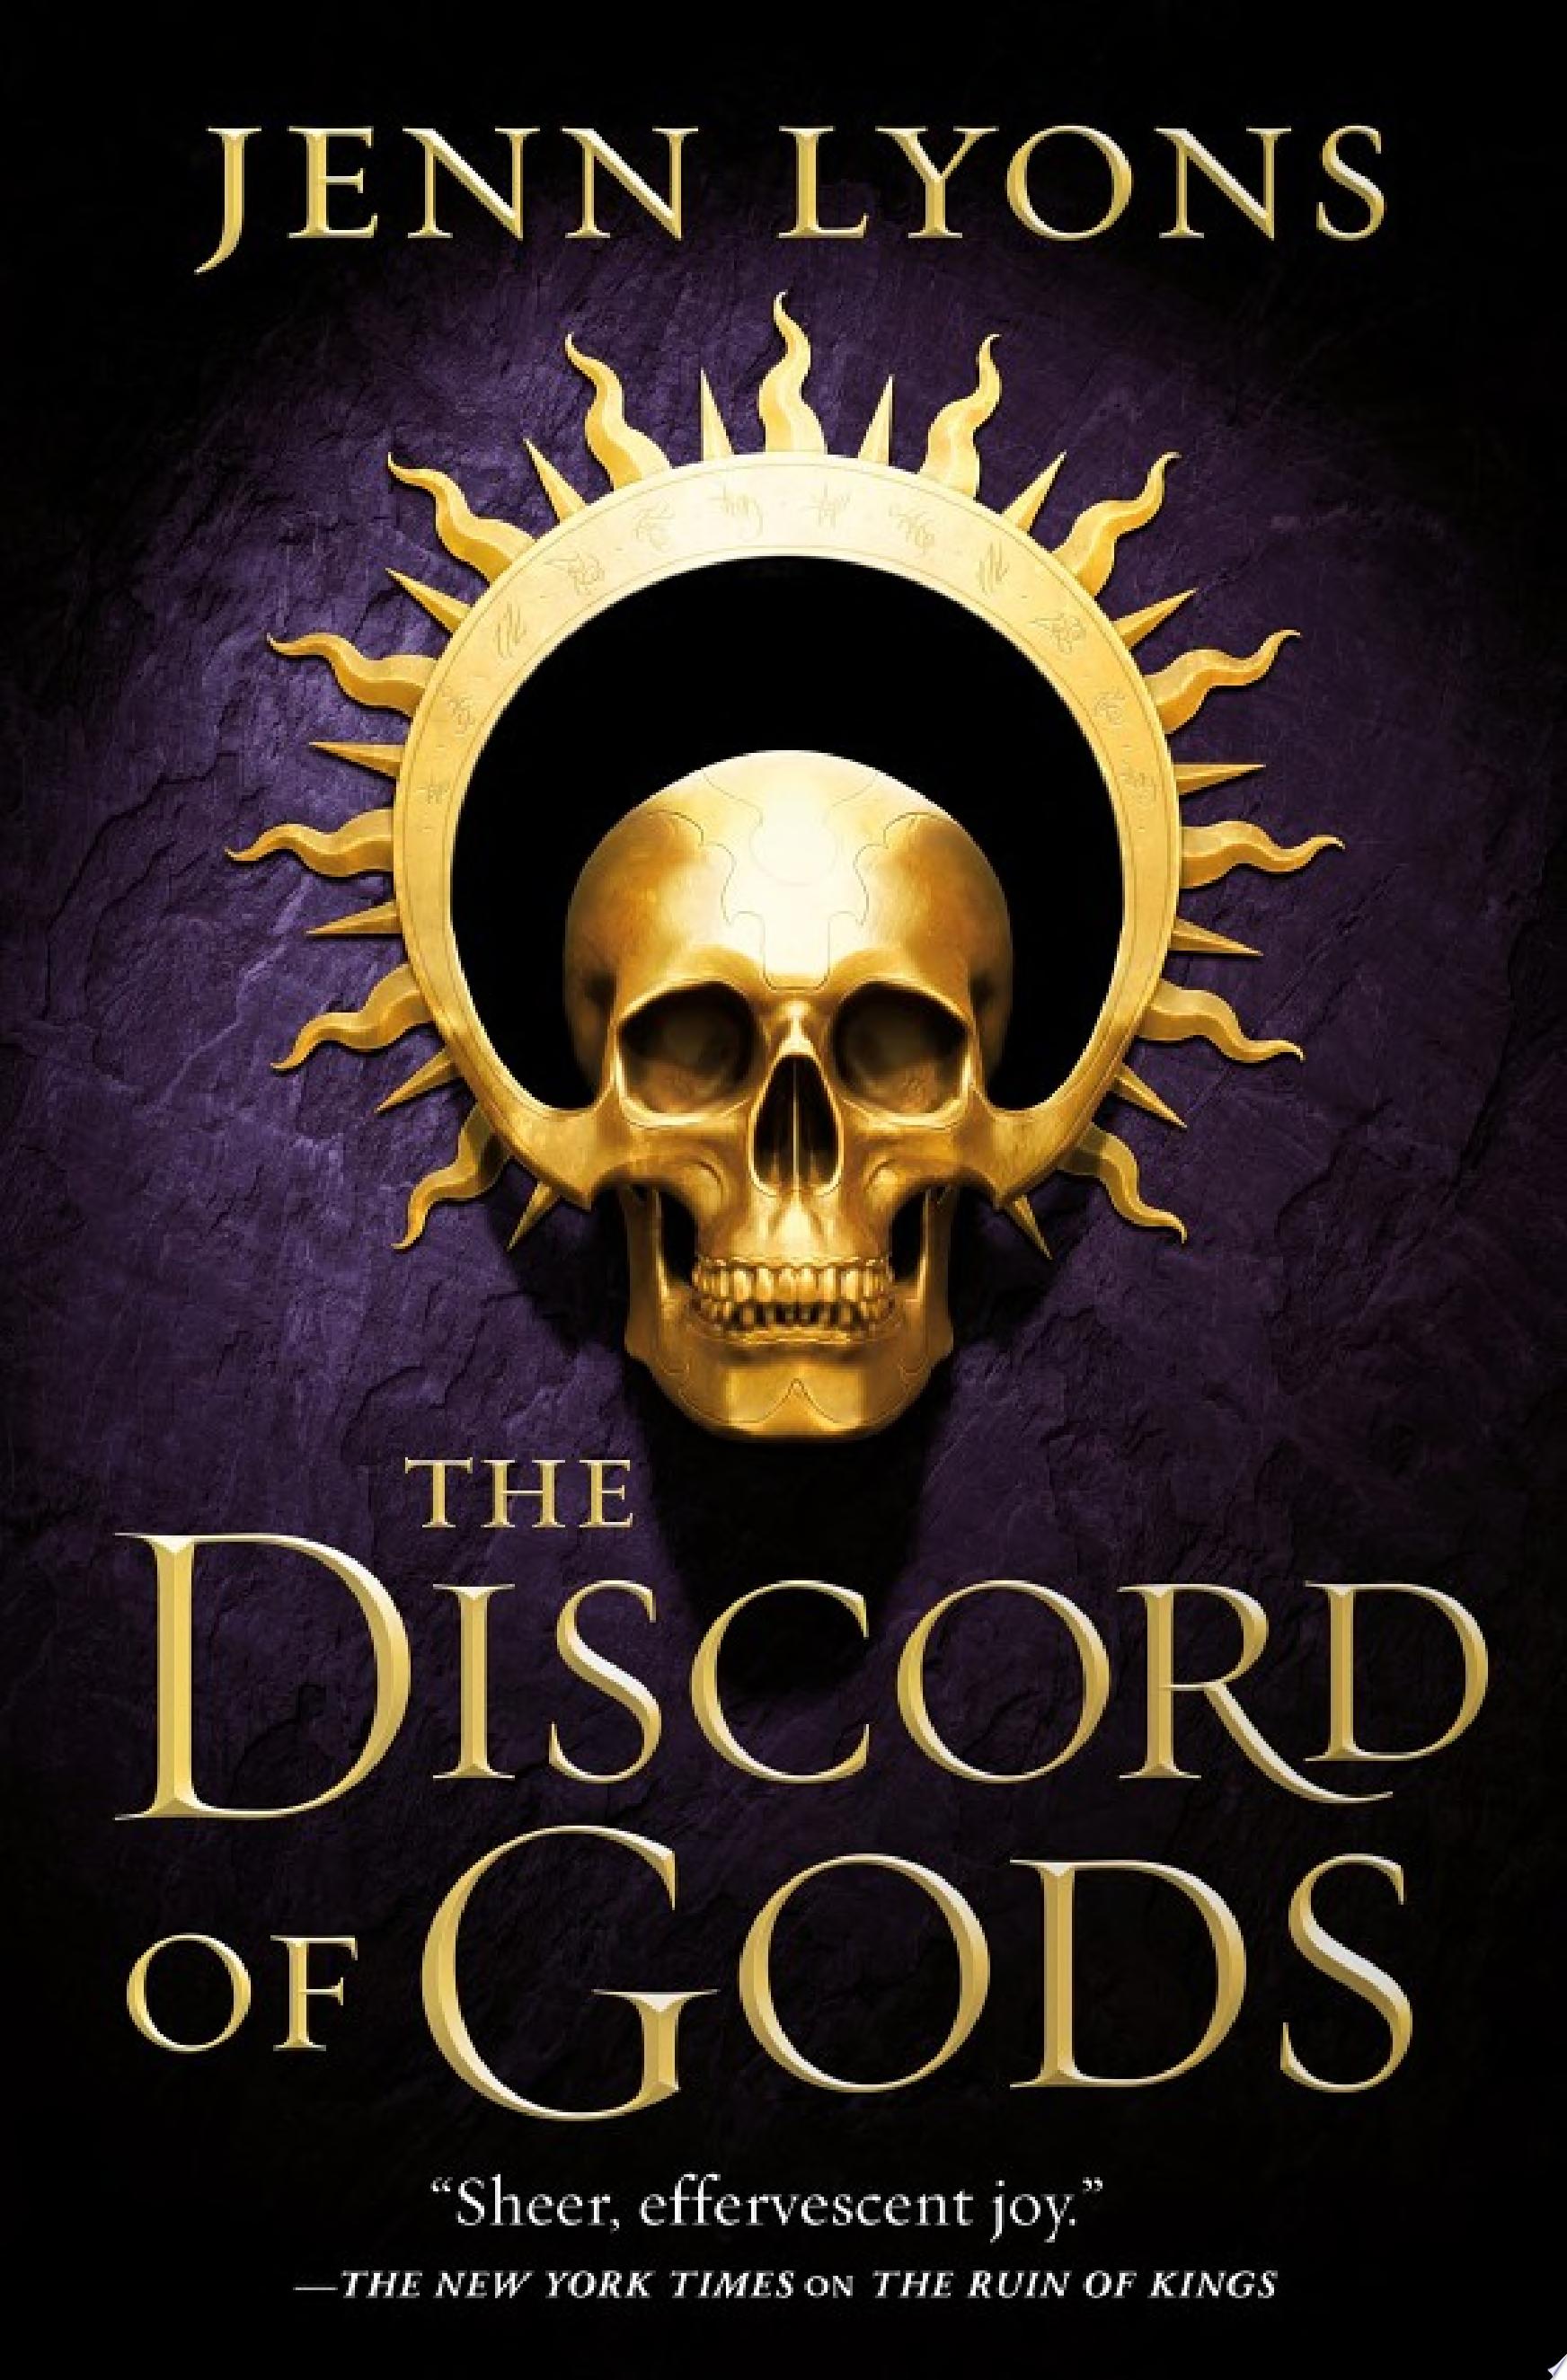 Image for "The Discord of Gods"